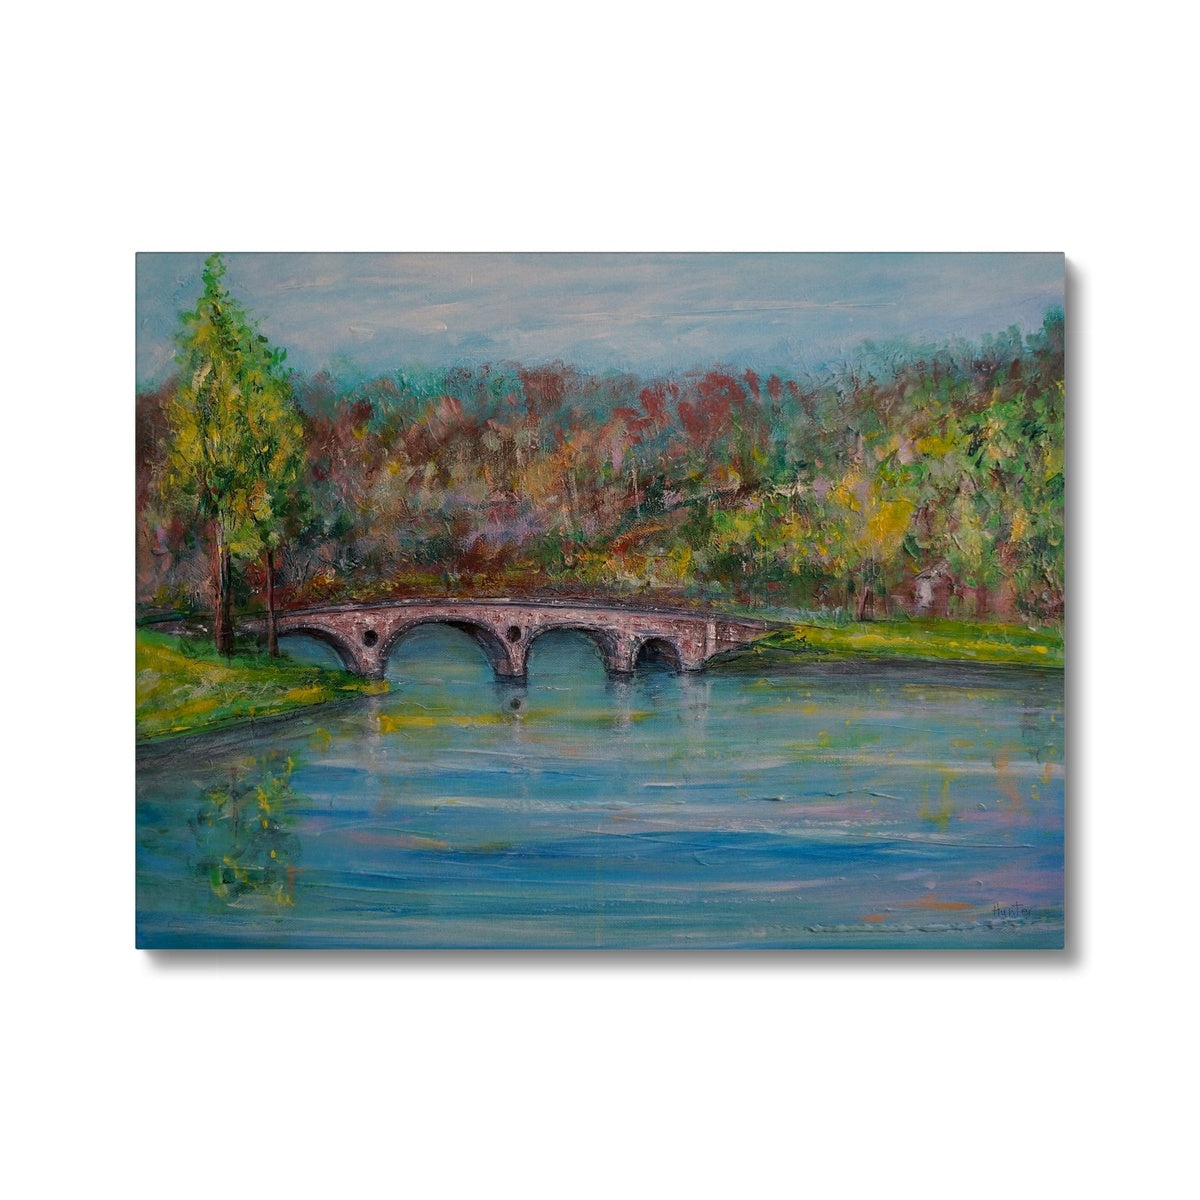 Kenmore Bridge Painting | Canvas From Scotland-Contemporary Stretched Canvas Prints-Scottish Highlands & Lowlands Art Gallery-24"x18"-Paintings, Prints, Homeware, Art Gifts From Scotland By Scottish Artist Kevin Hunter